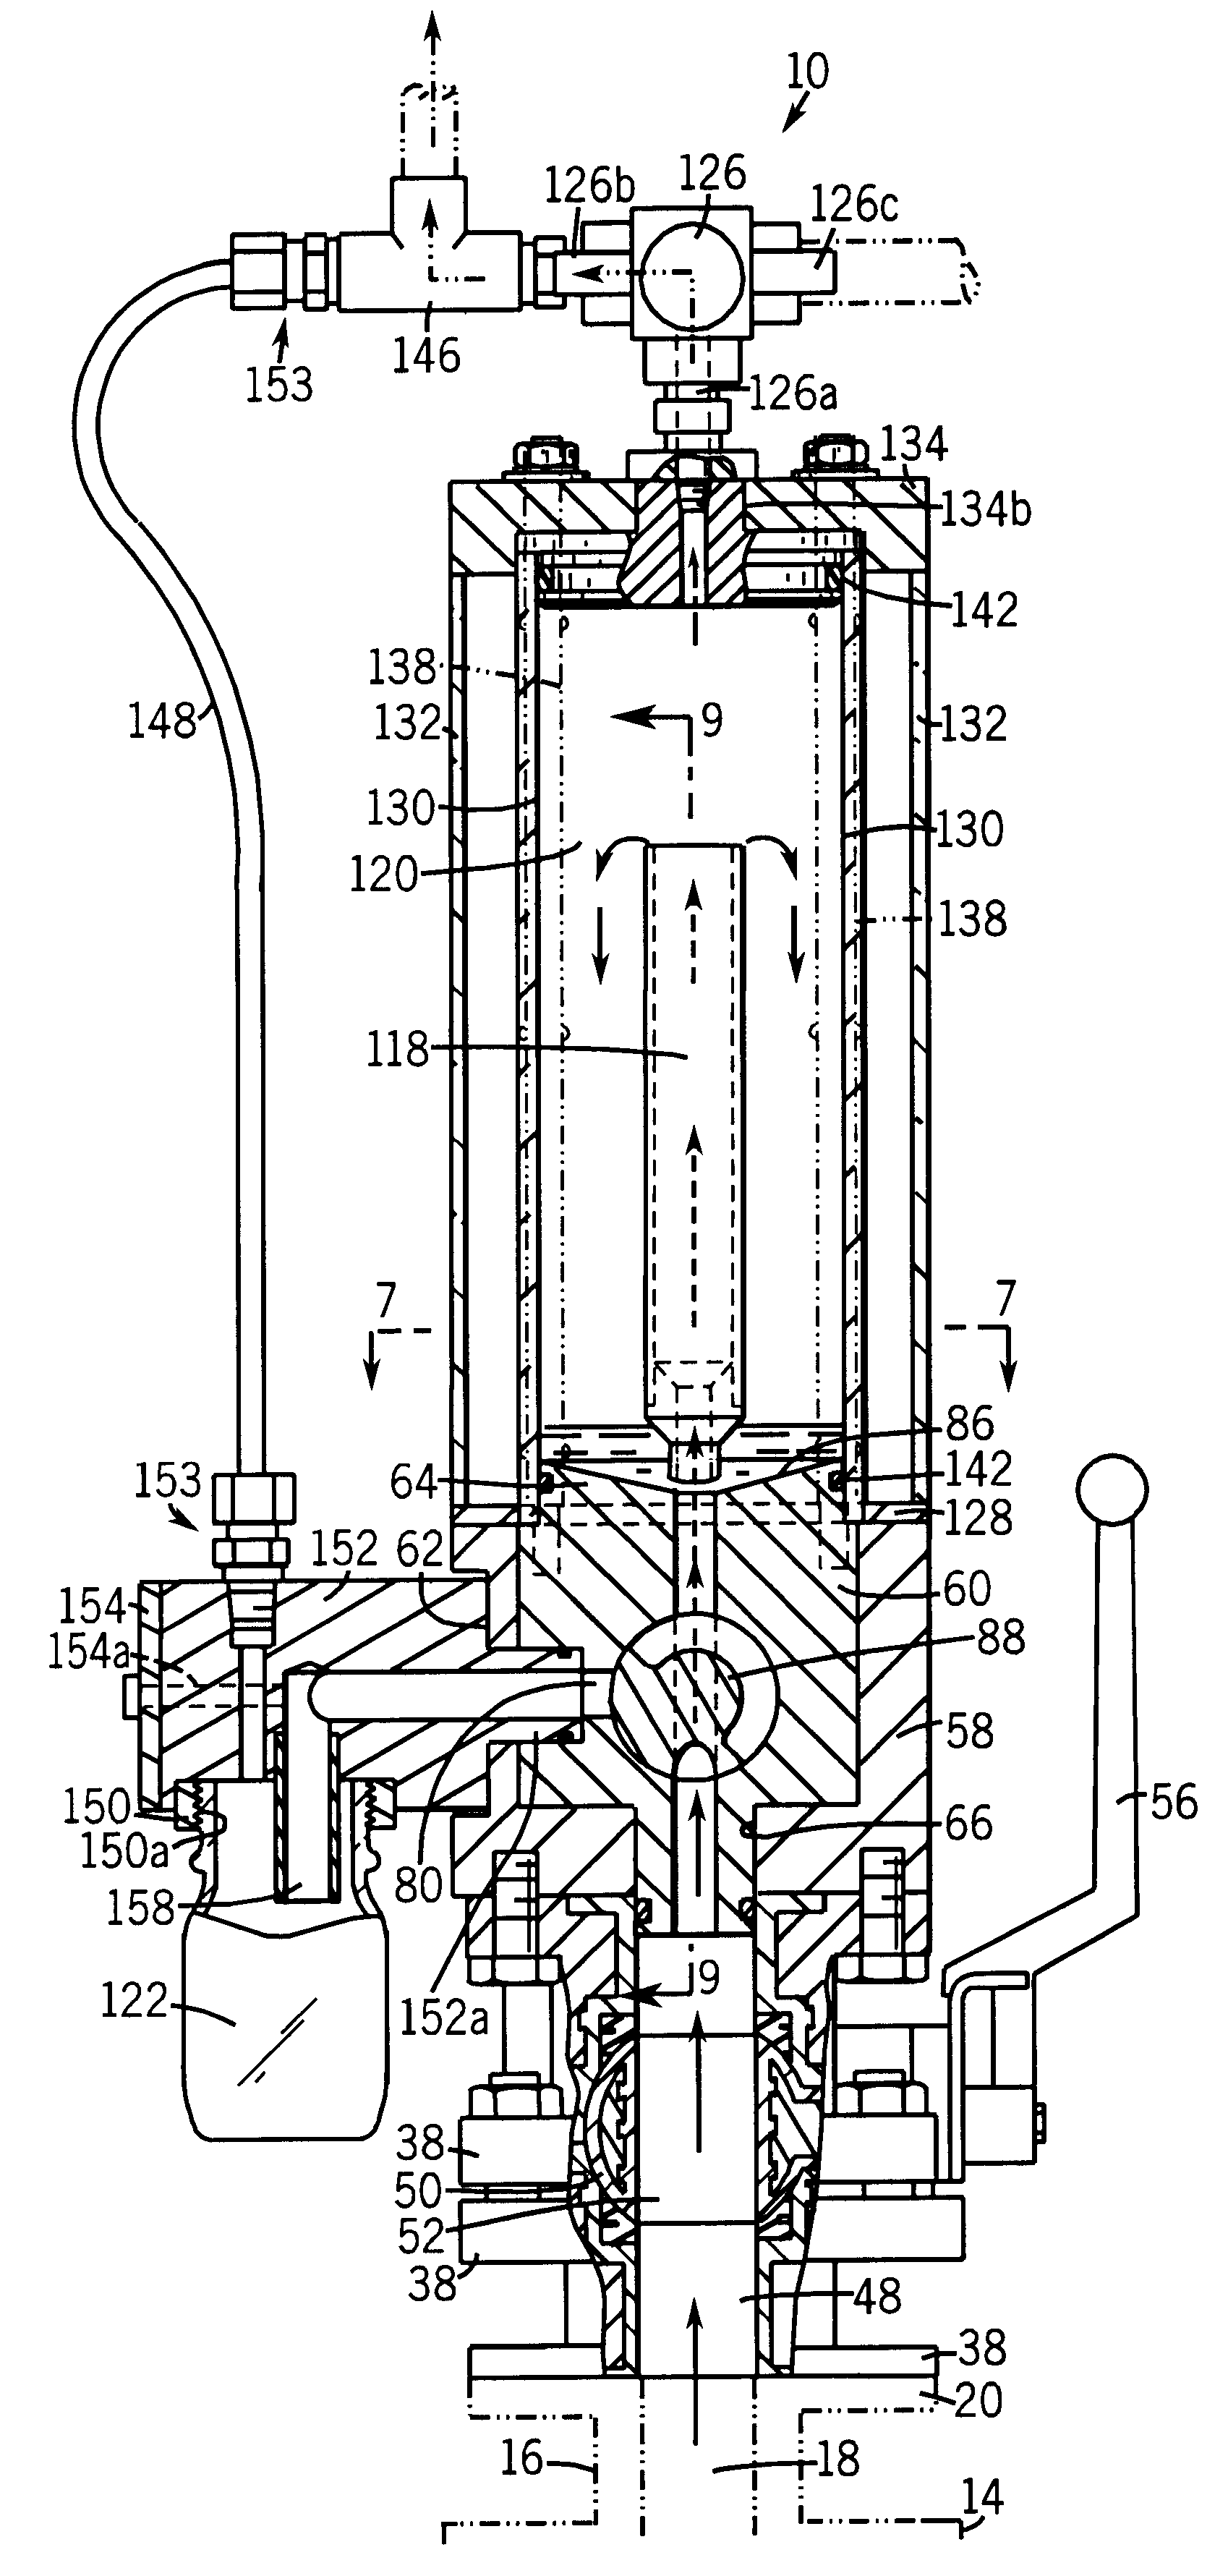 Apparatus and method for sampling fluid from reactor vessel